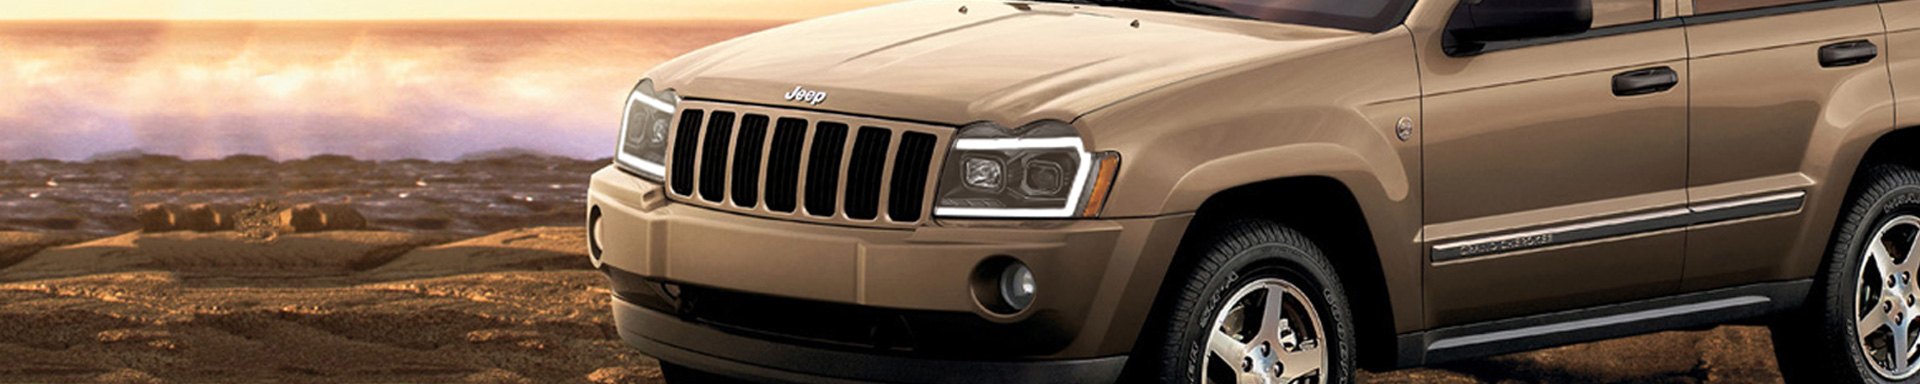 Anzo Now Offers Switchback LED Projector Headlights for Jeep Grand Cherokee